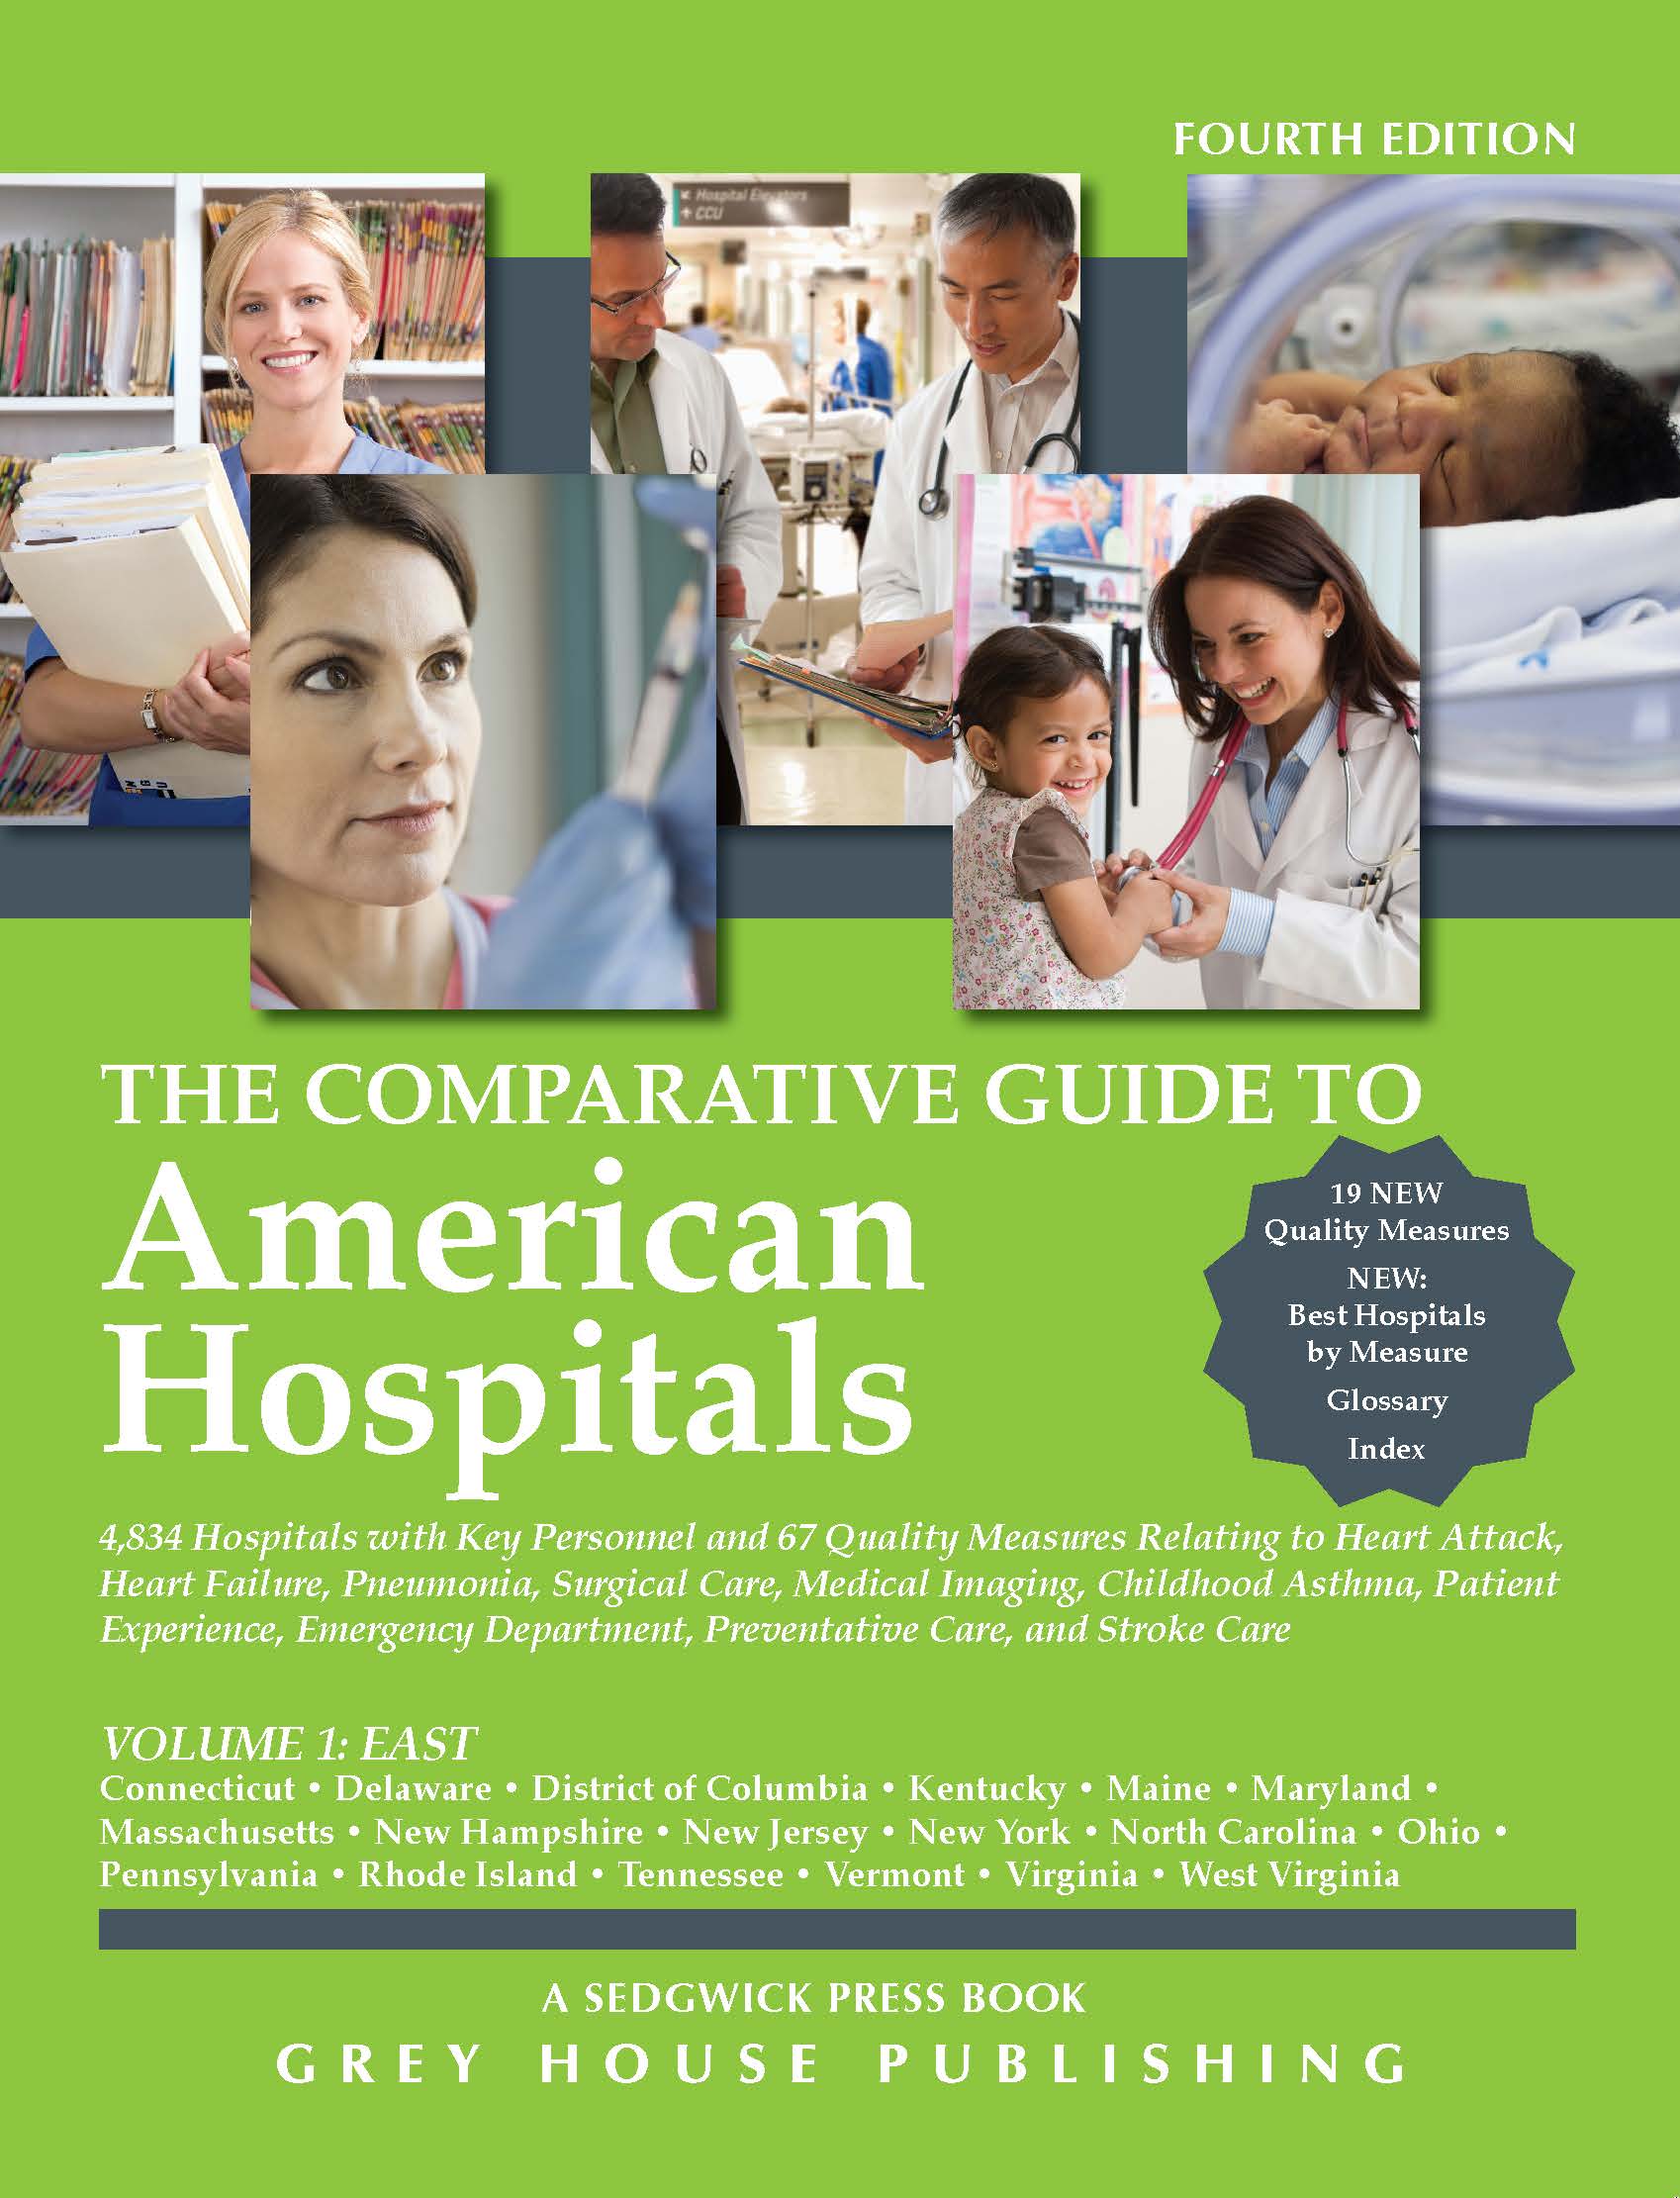 The Comparative Guide to American Hospitals